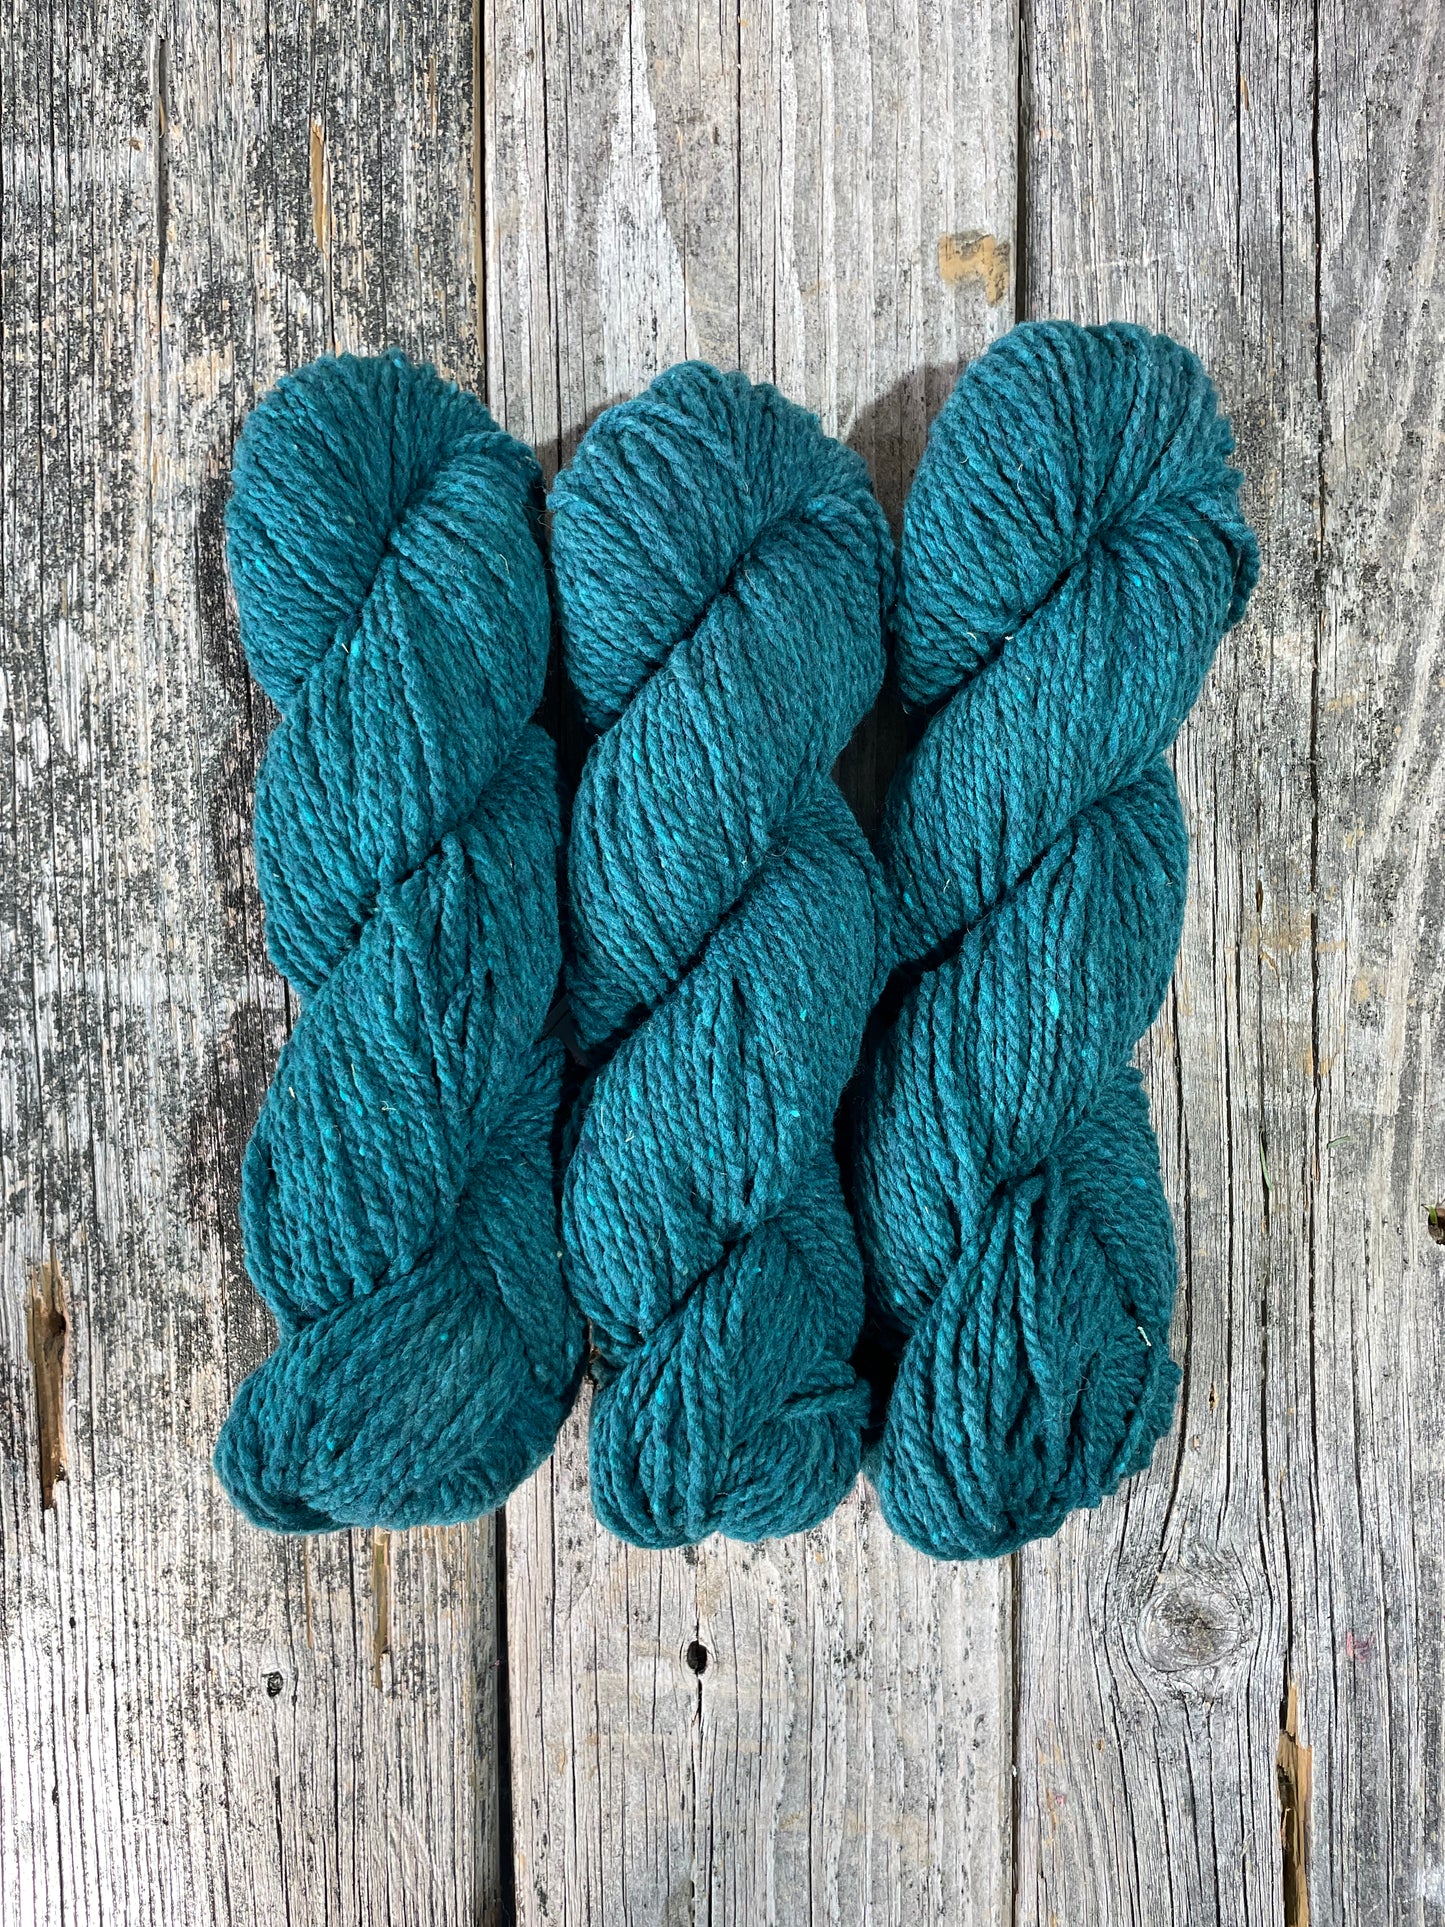 Weekend Wool: Teal by Green Mountain Spinnery